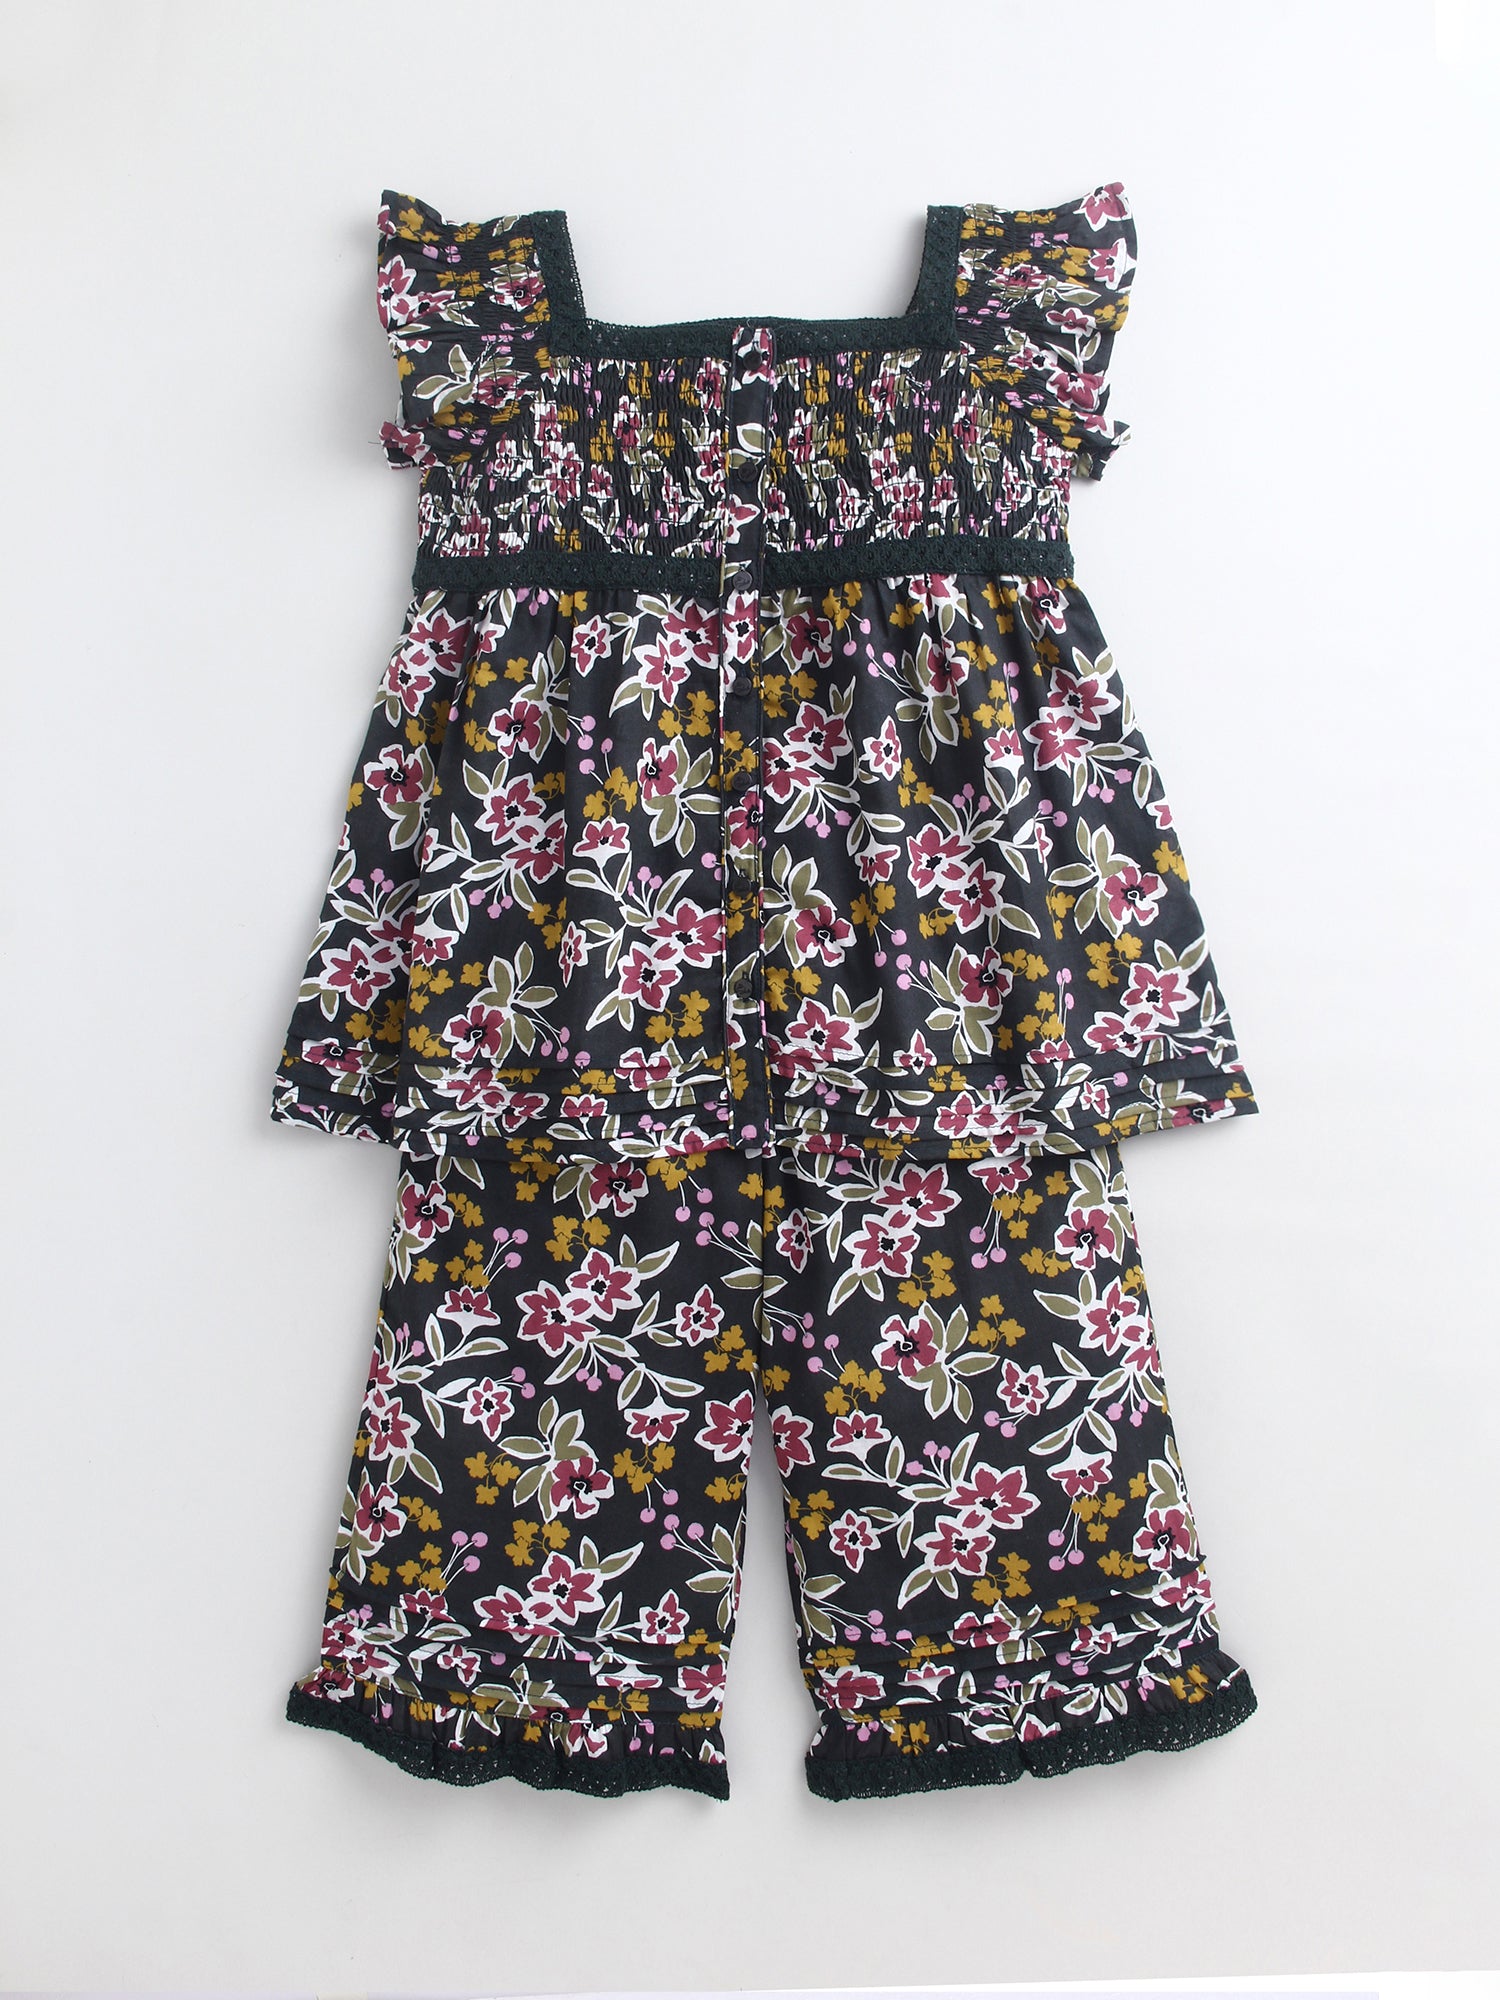 Girls Clothes - Latest Girls Collection | Cherry Crumble by Nitt Hyman